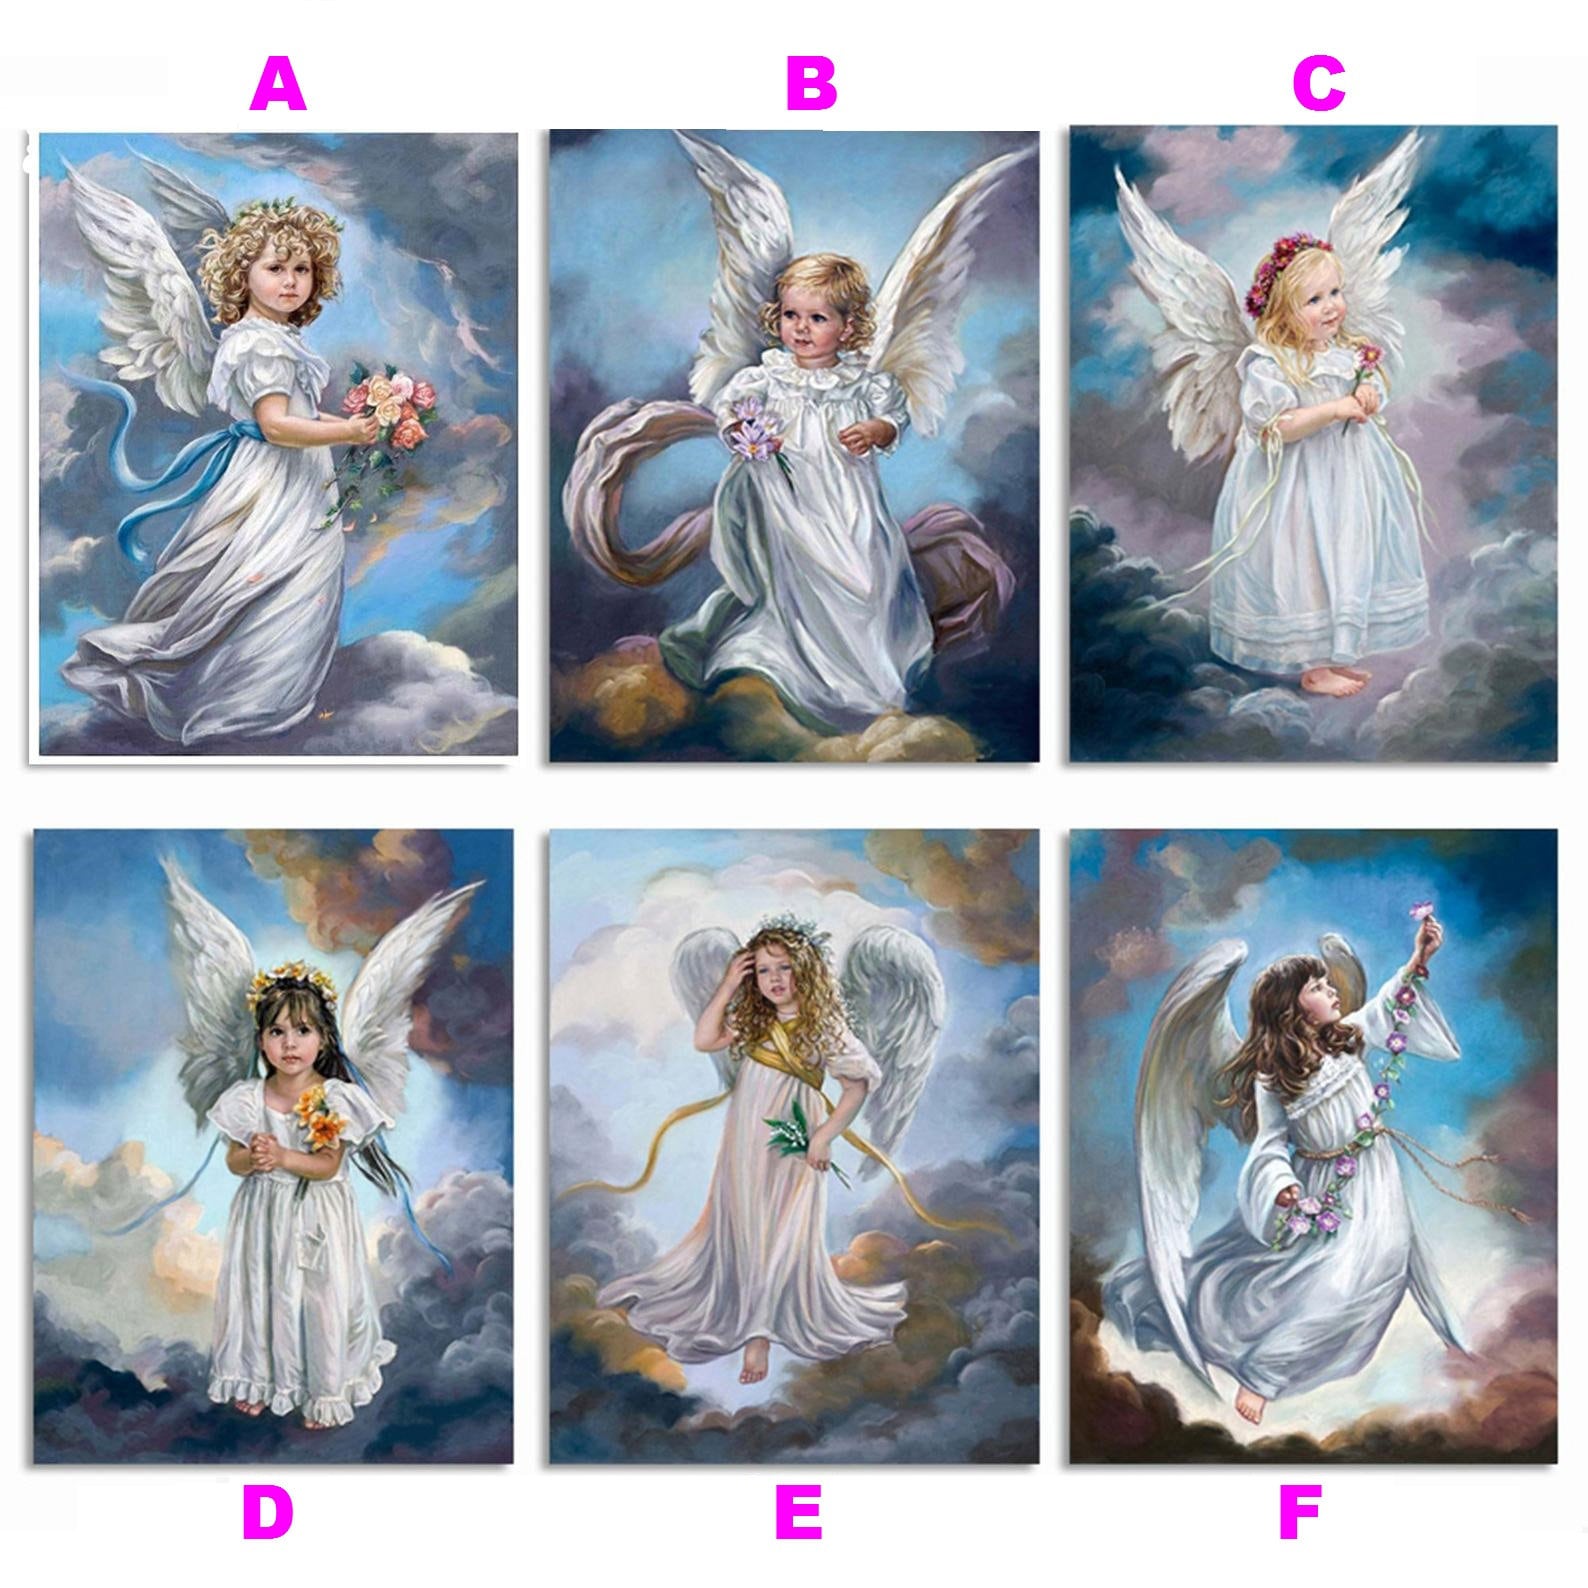 Blue and White Angel LUSandy 5D Diamond Painting Angel Dress Lady Full Drill Women Girl Diamond Art Kits for Adults and Kids Home Wall Decor 12 x 17.7 inch 